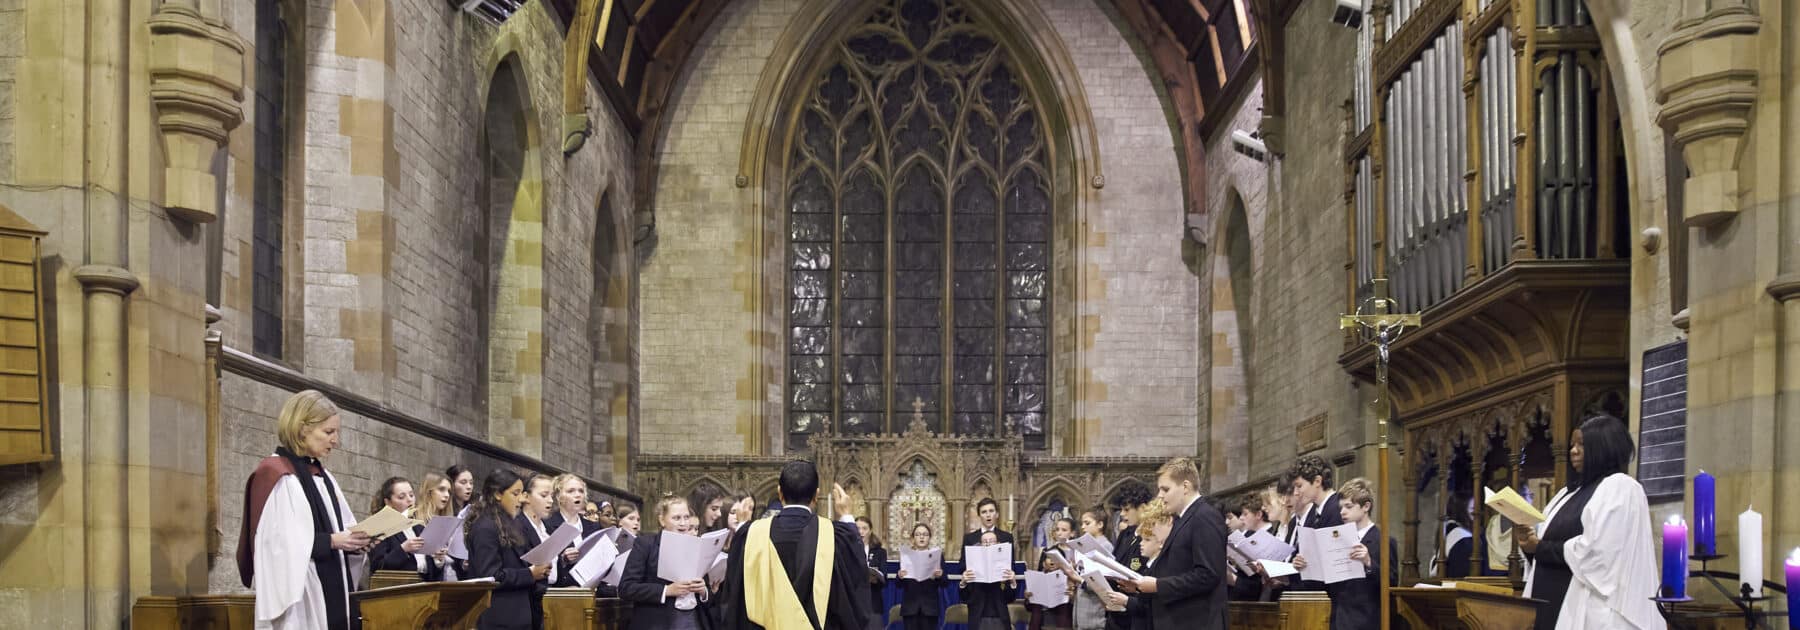 Embracing Tradition at the Annual Carol Service